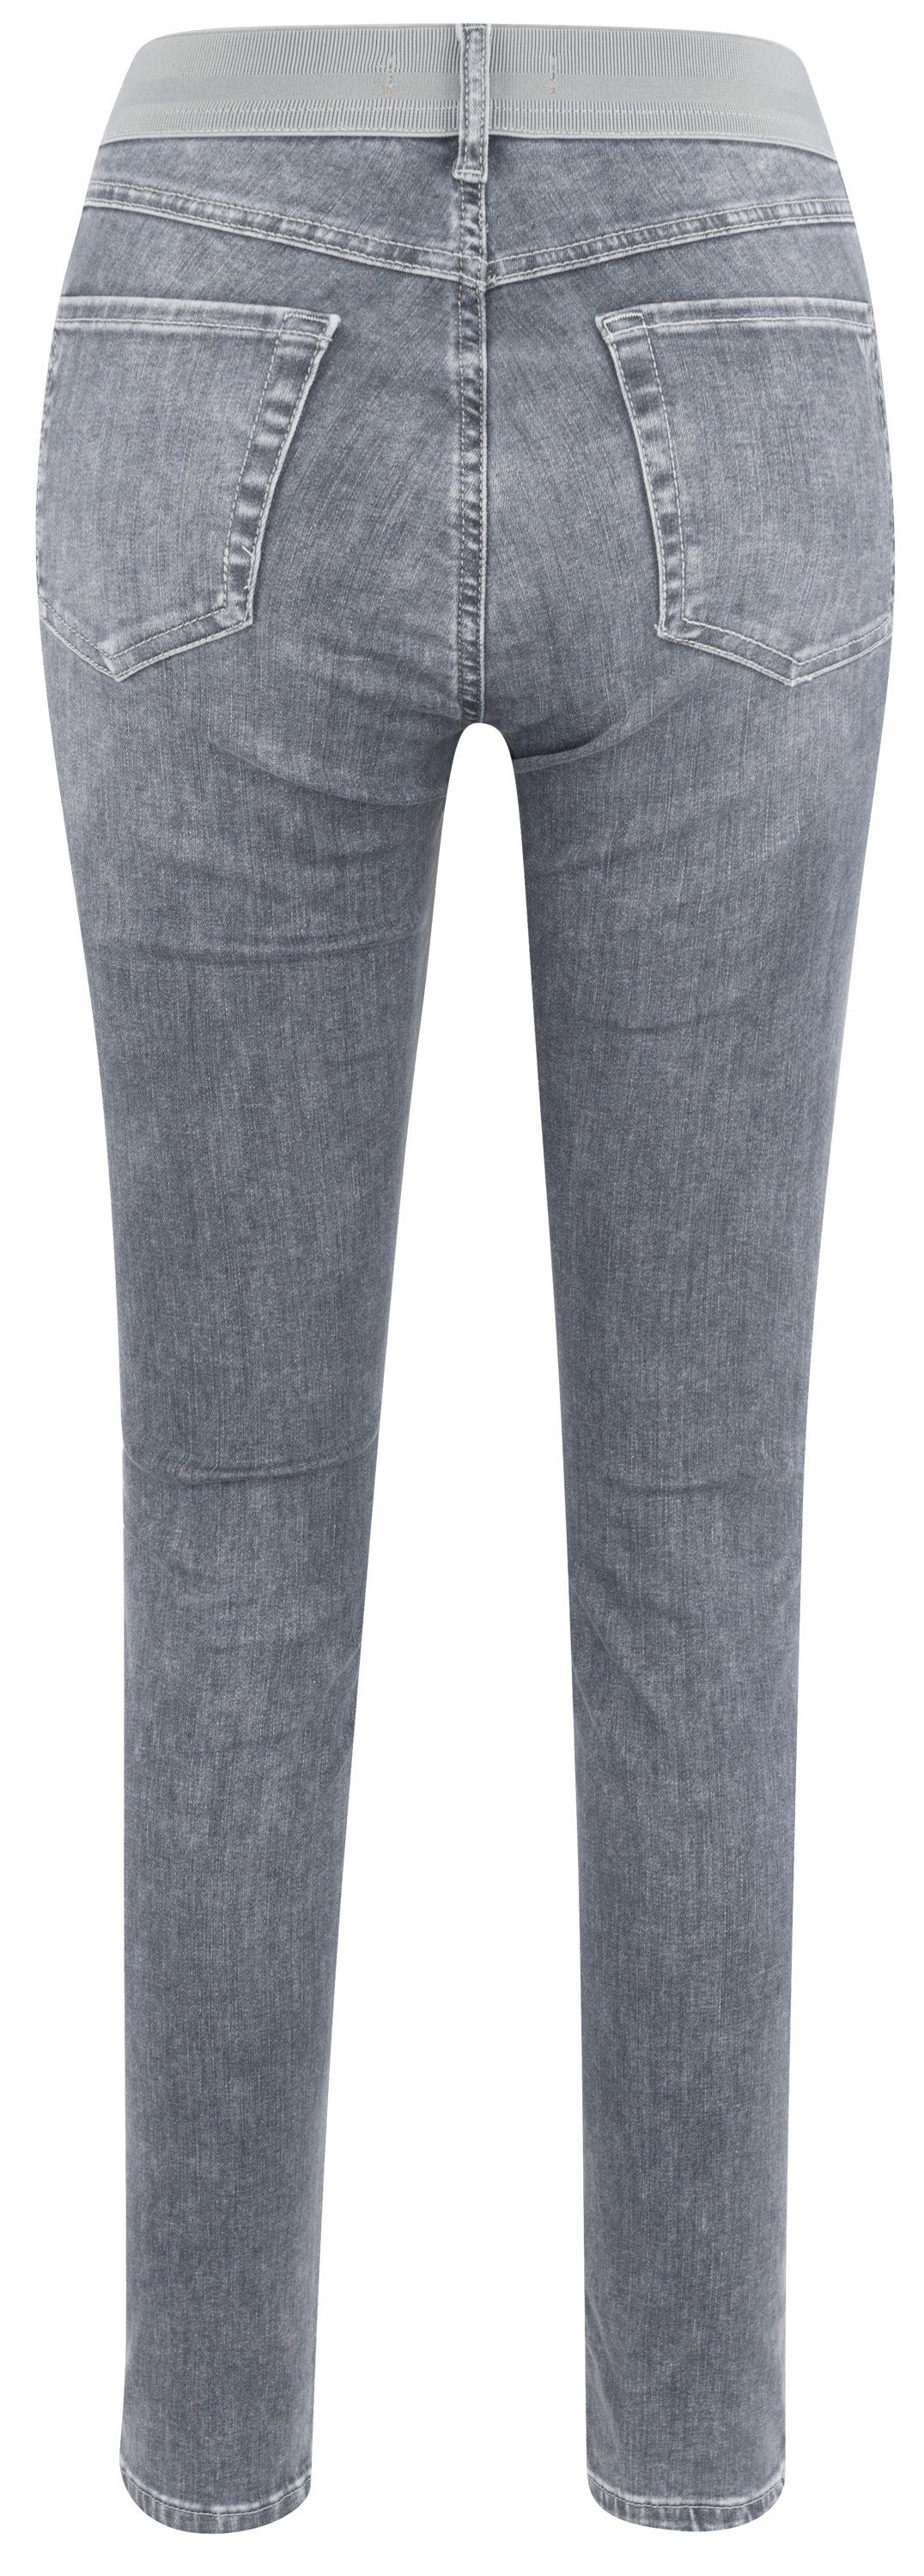 123730.1358 ANGELS mid SIZE 1358 used ANGELS JEANS Stretch-Jeans 399 mid ONE used grey grey